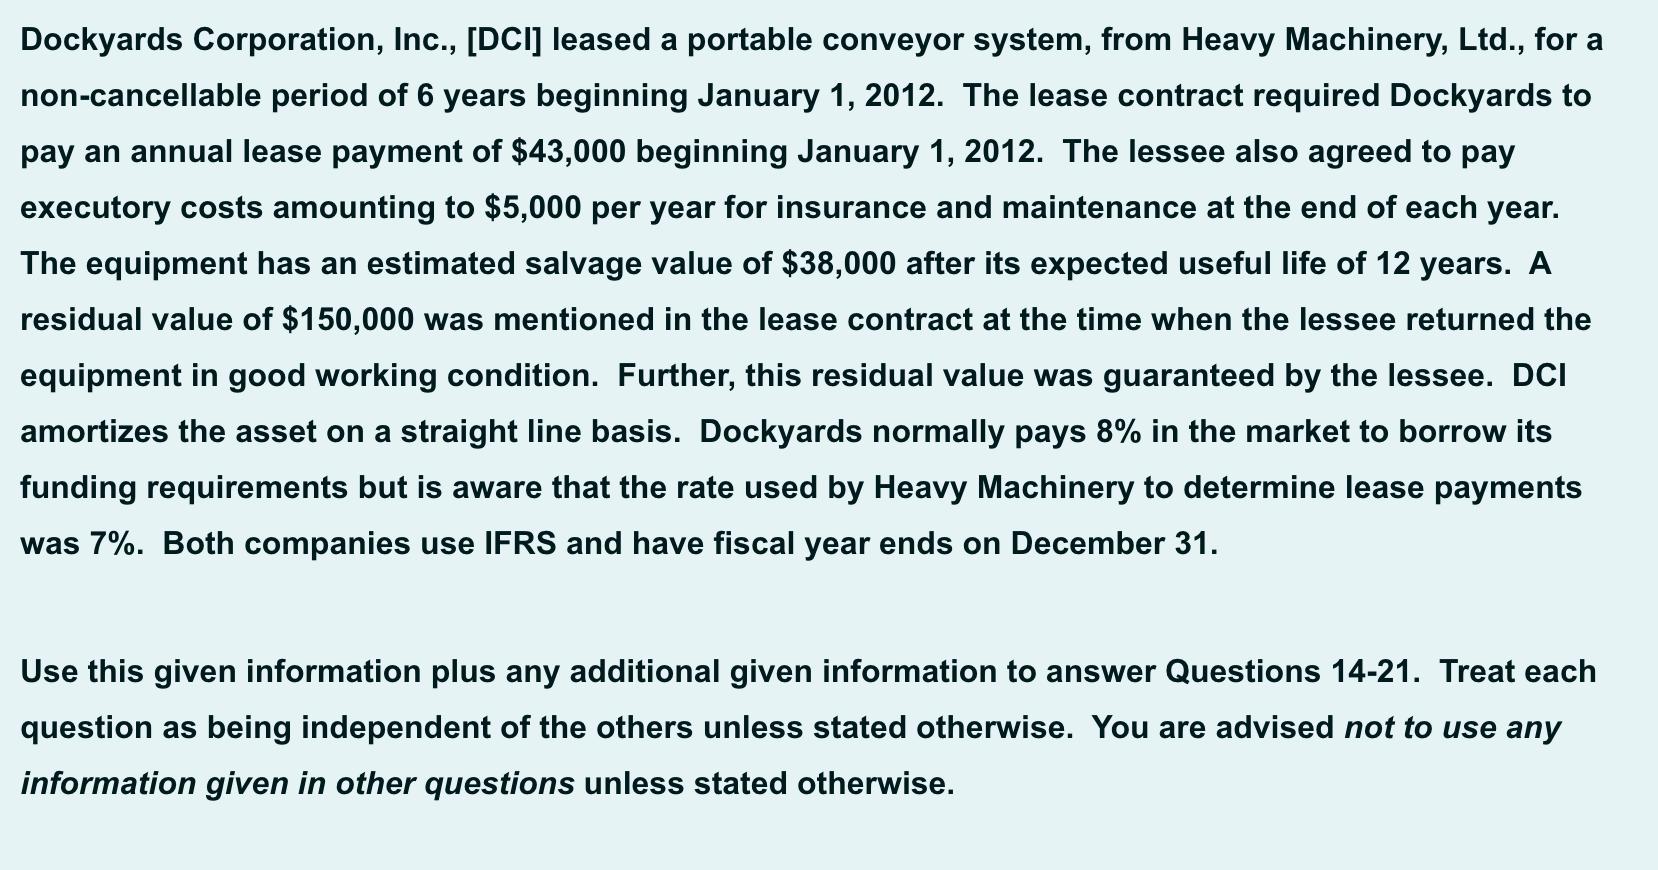 2 Dockyards Corporation, Inc., [DCI) leased a portable conveyor system, from Heavy Machinery, Ltd., for a non-cancellable per